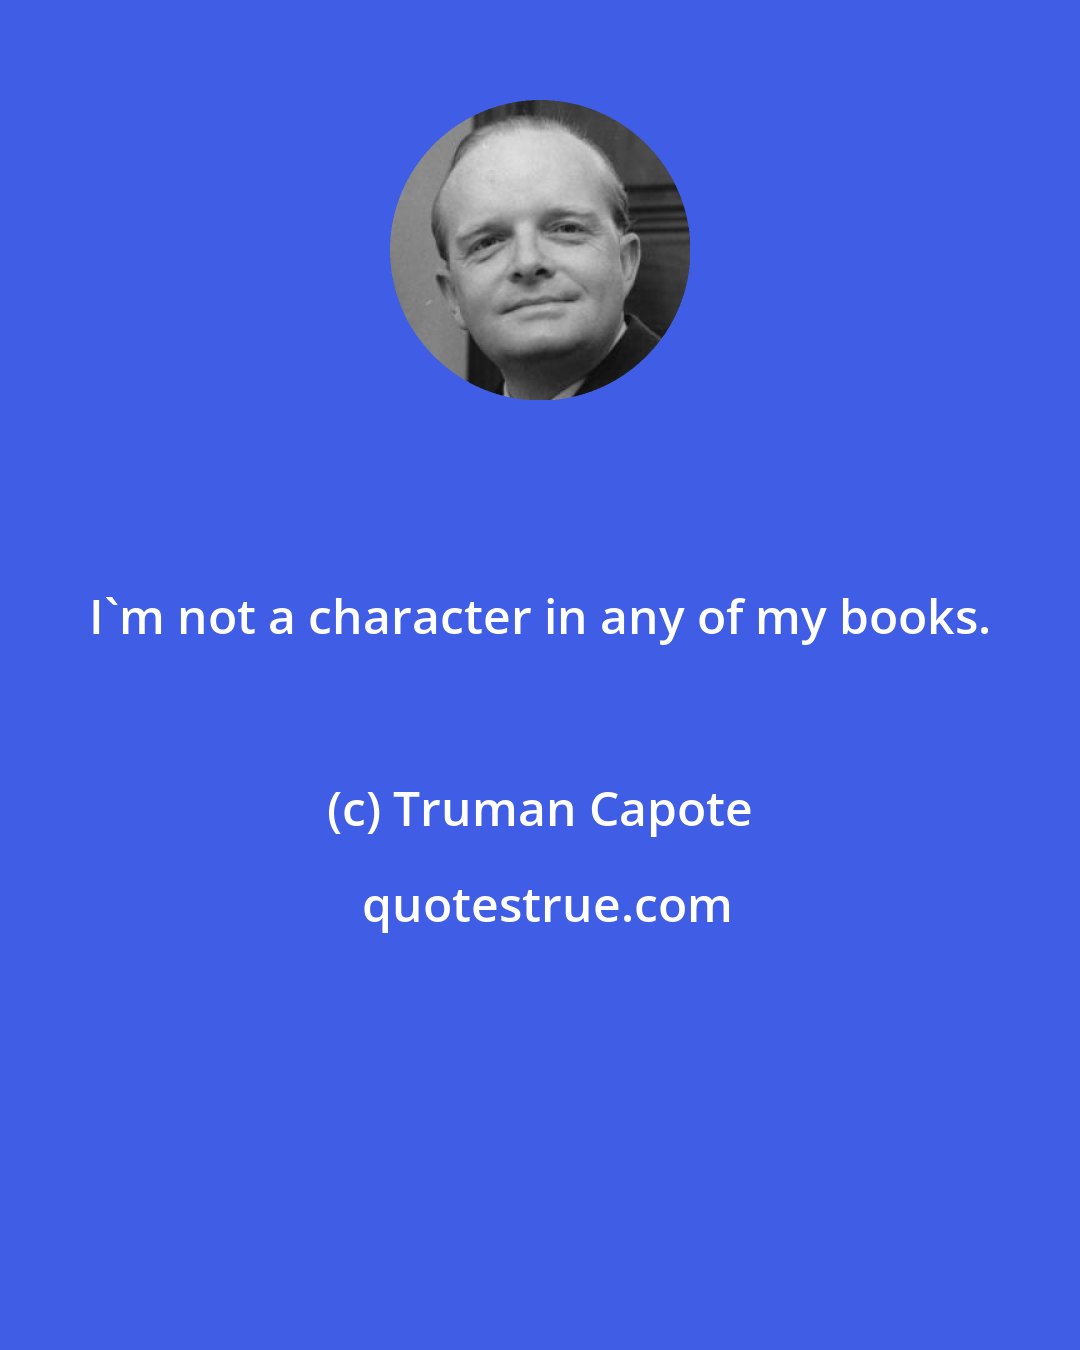 Truman Capote: I'm not a character in any of my books.